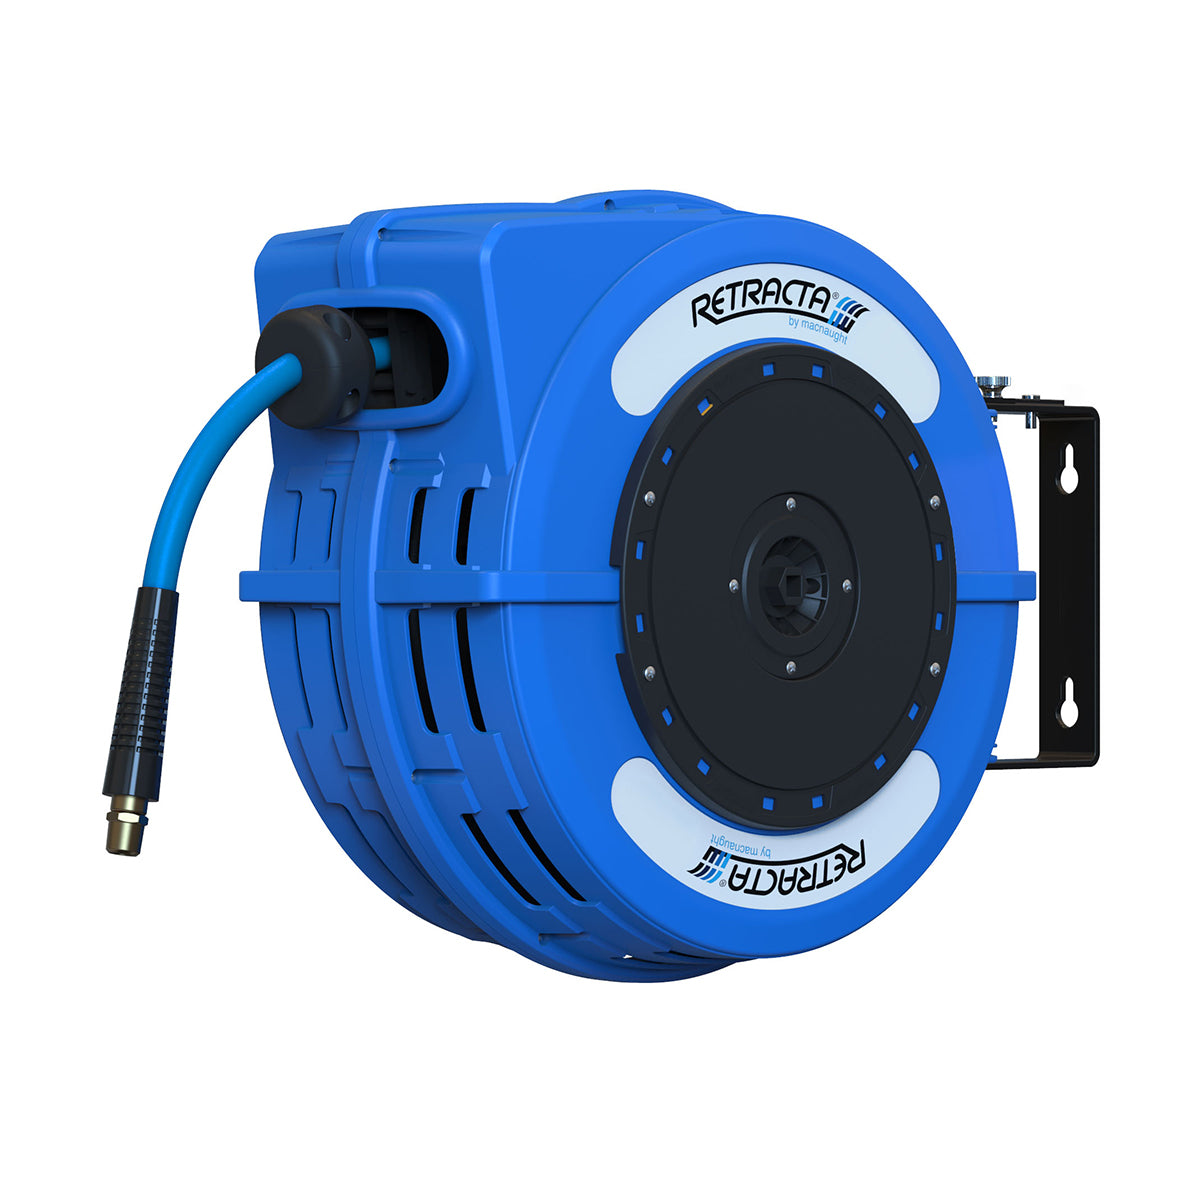 Retractable Hose Reel for Grease with 1/4” x 50 ft Hose | Macnaught USA 2819